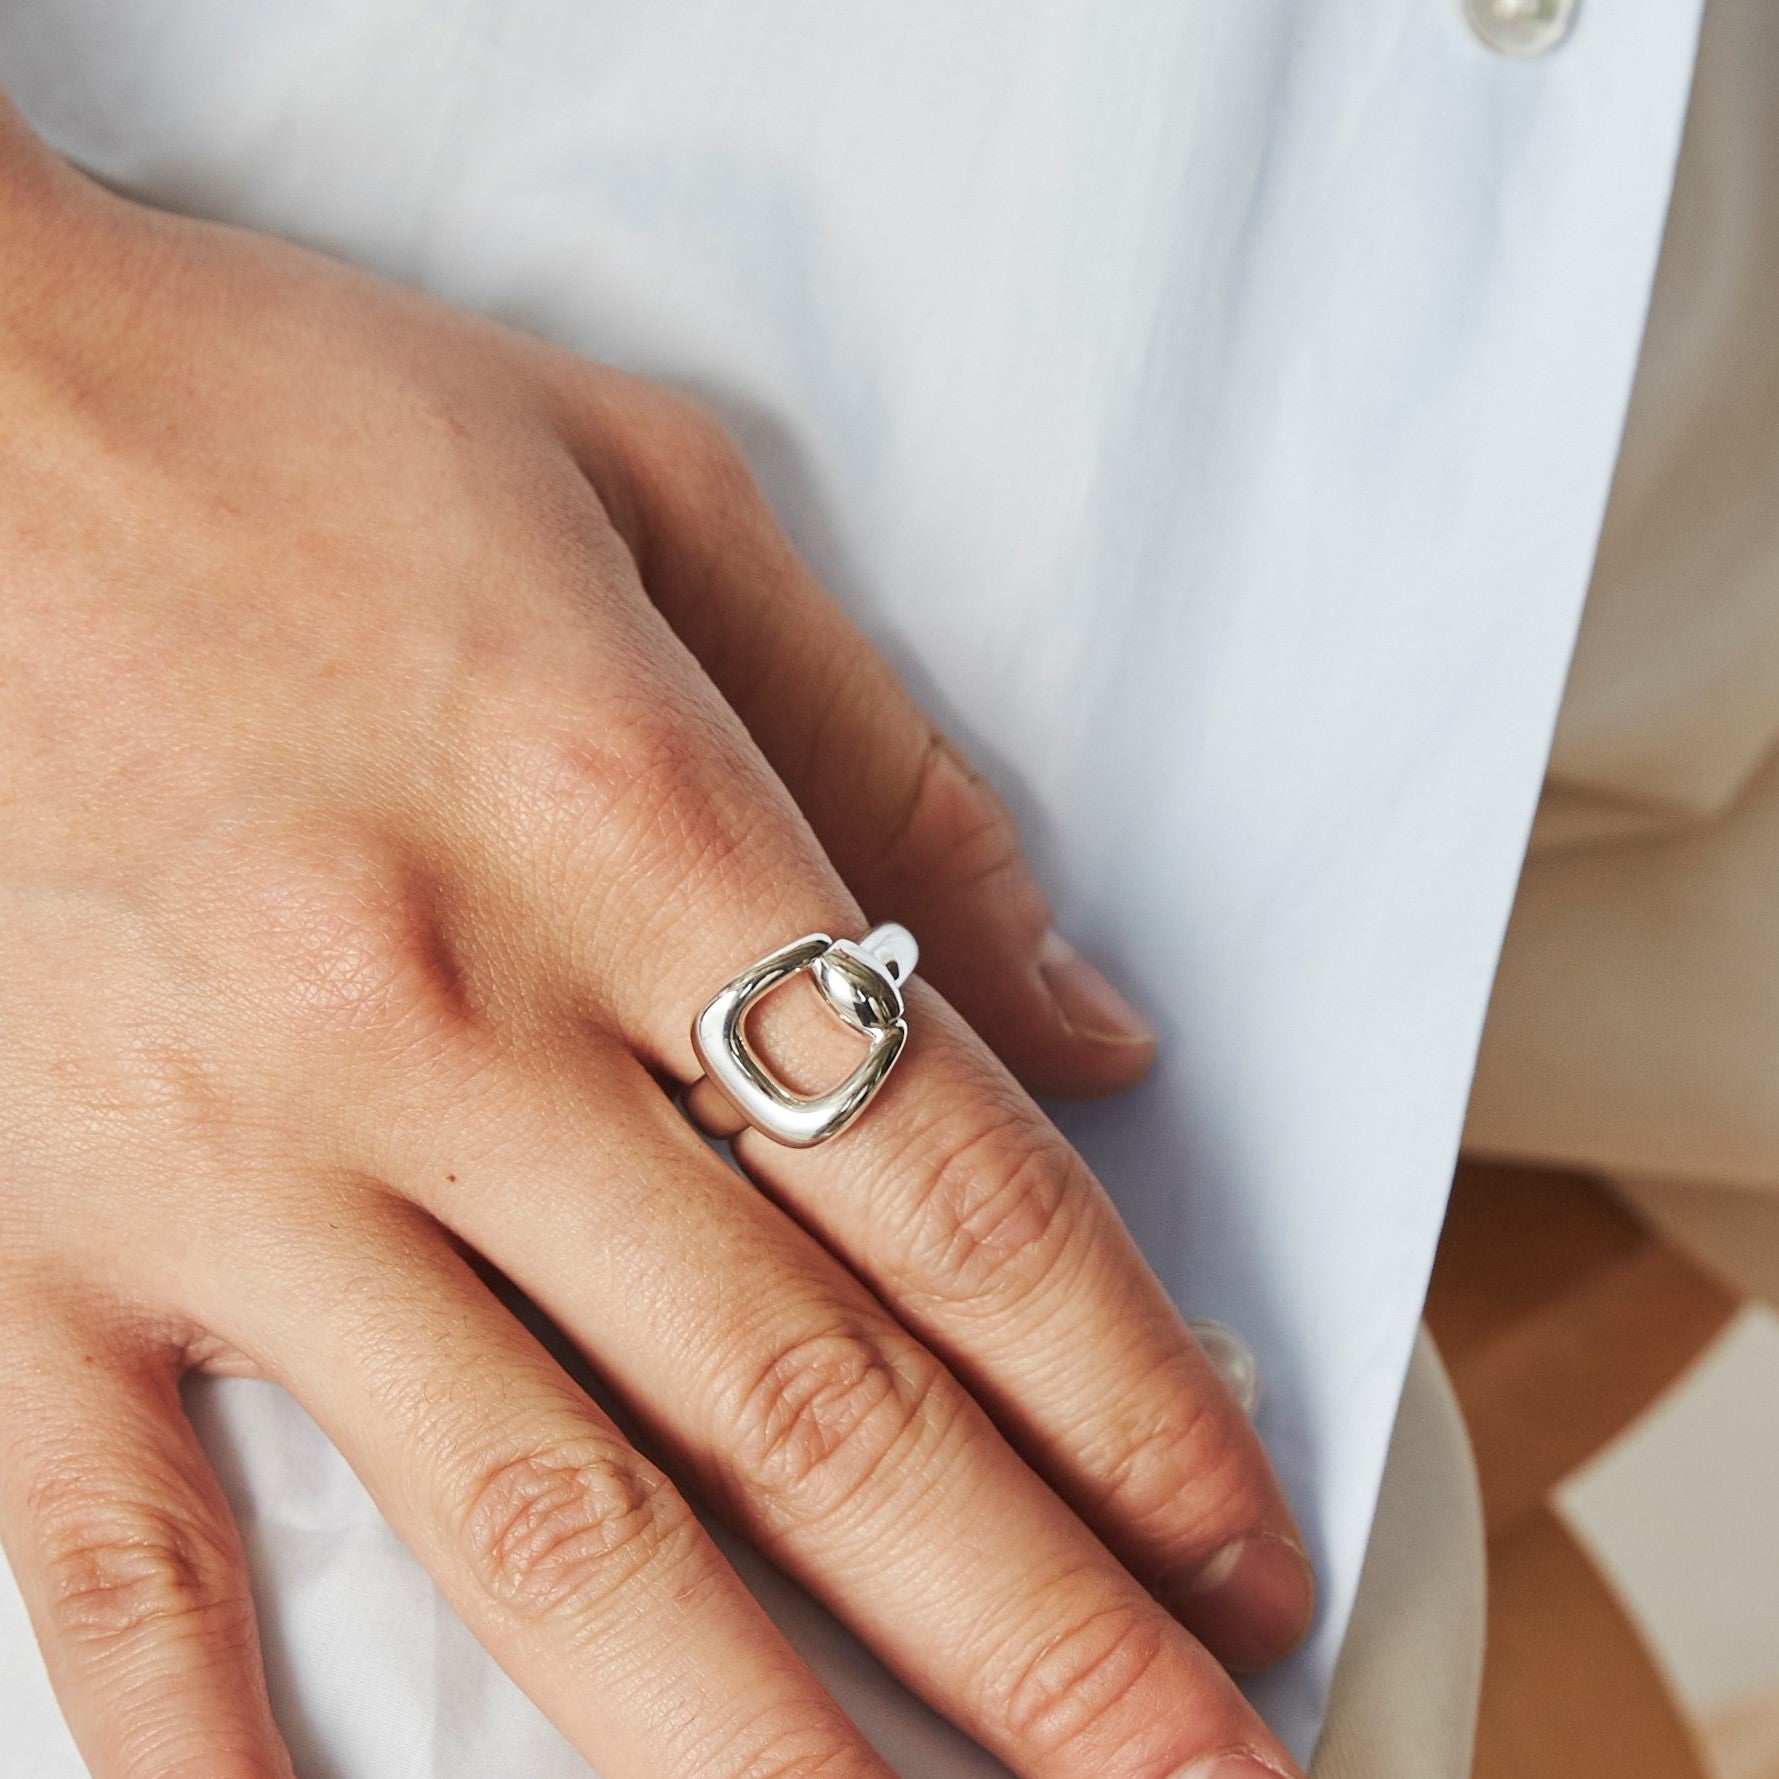 Square Form Ring